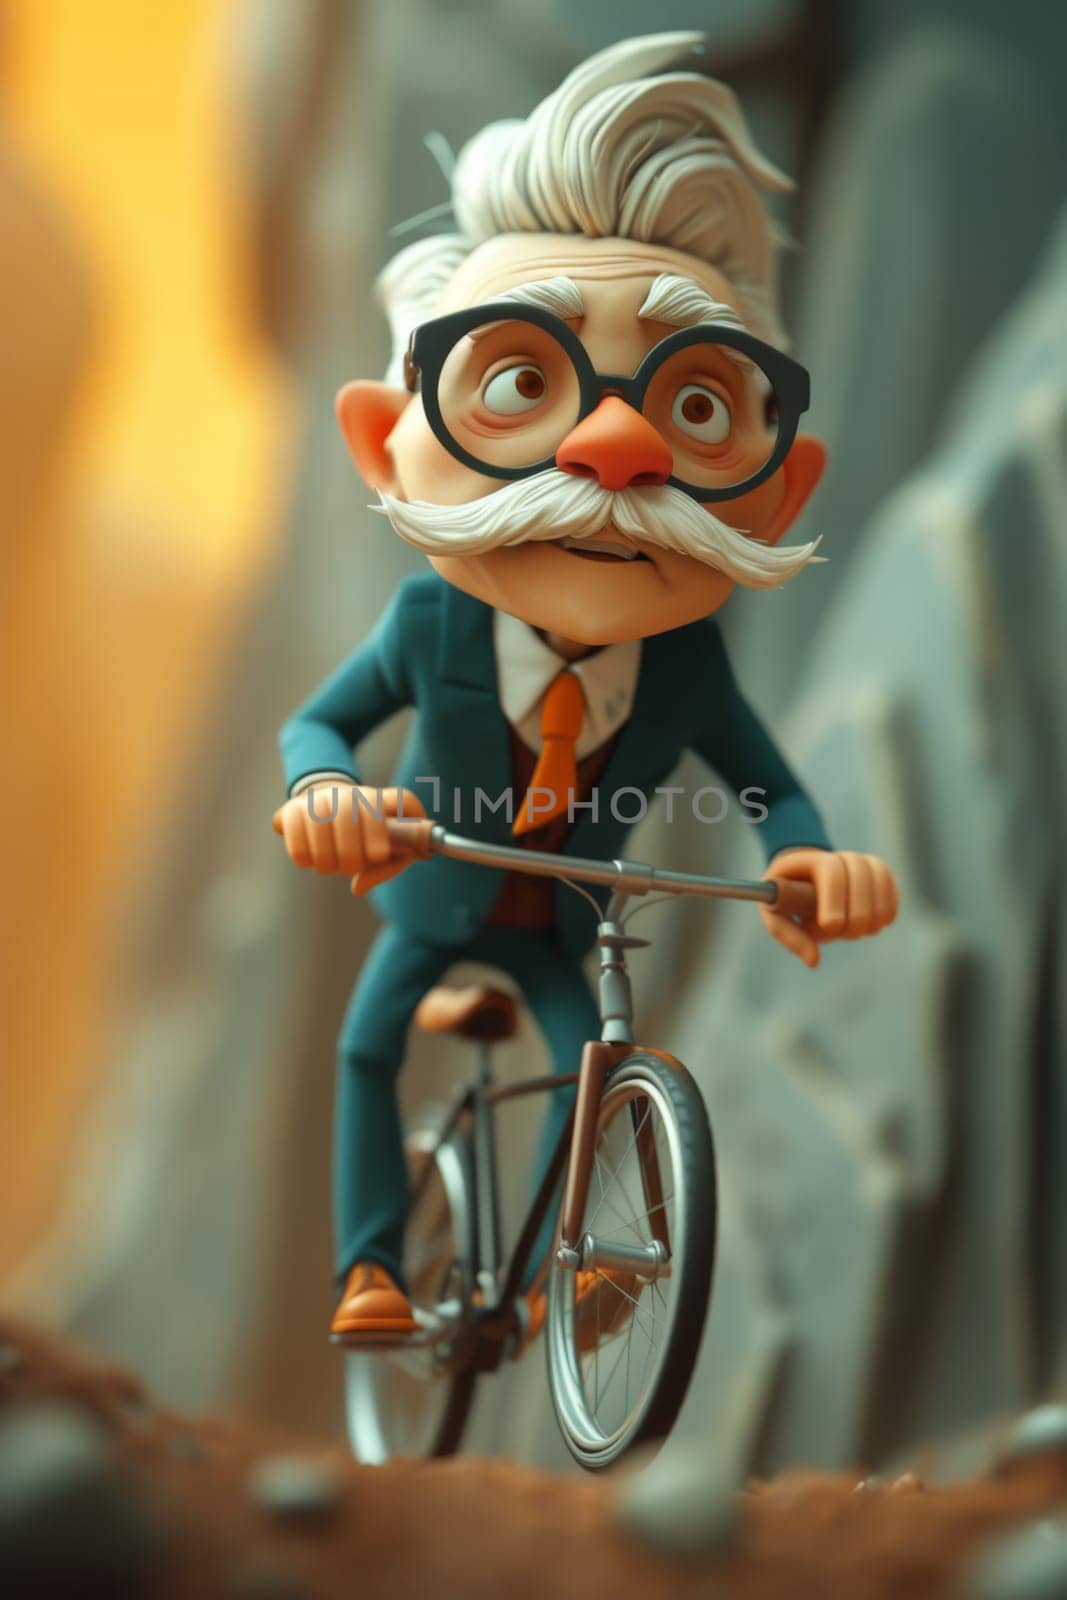 A cartoon character in a formal suit riding a bicycle down the street . 3d illustration.